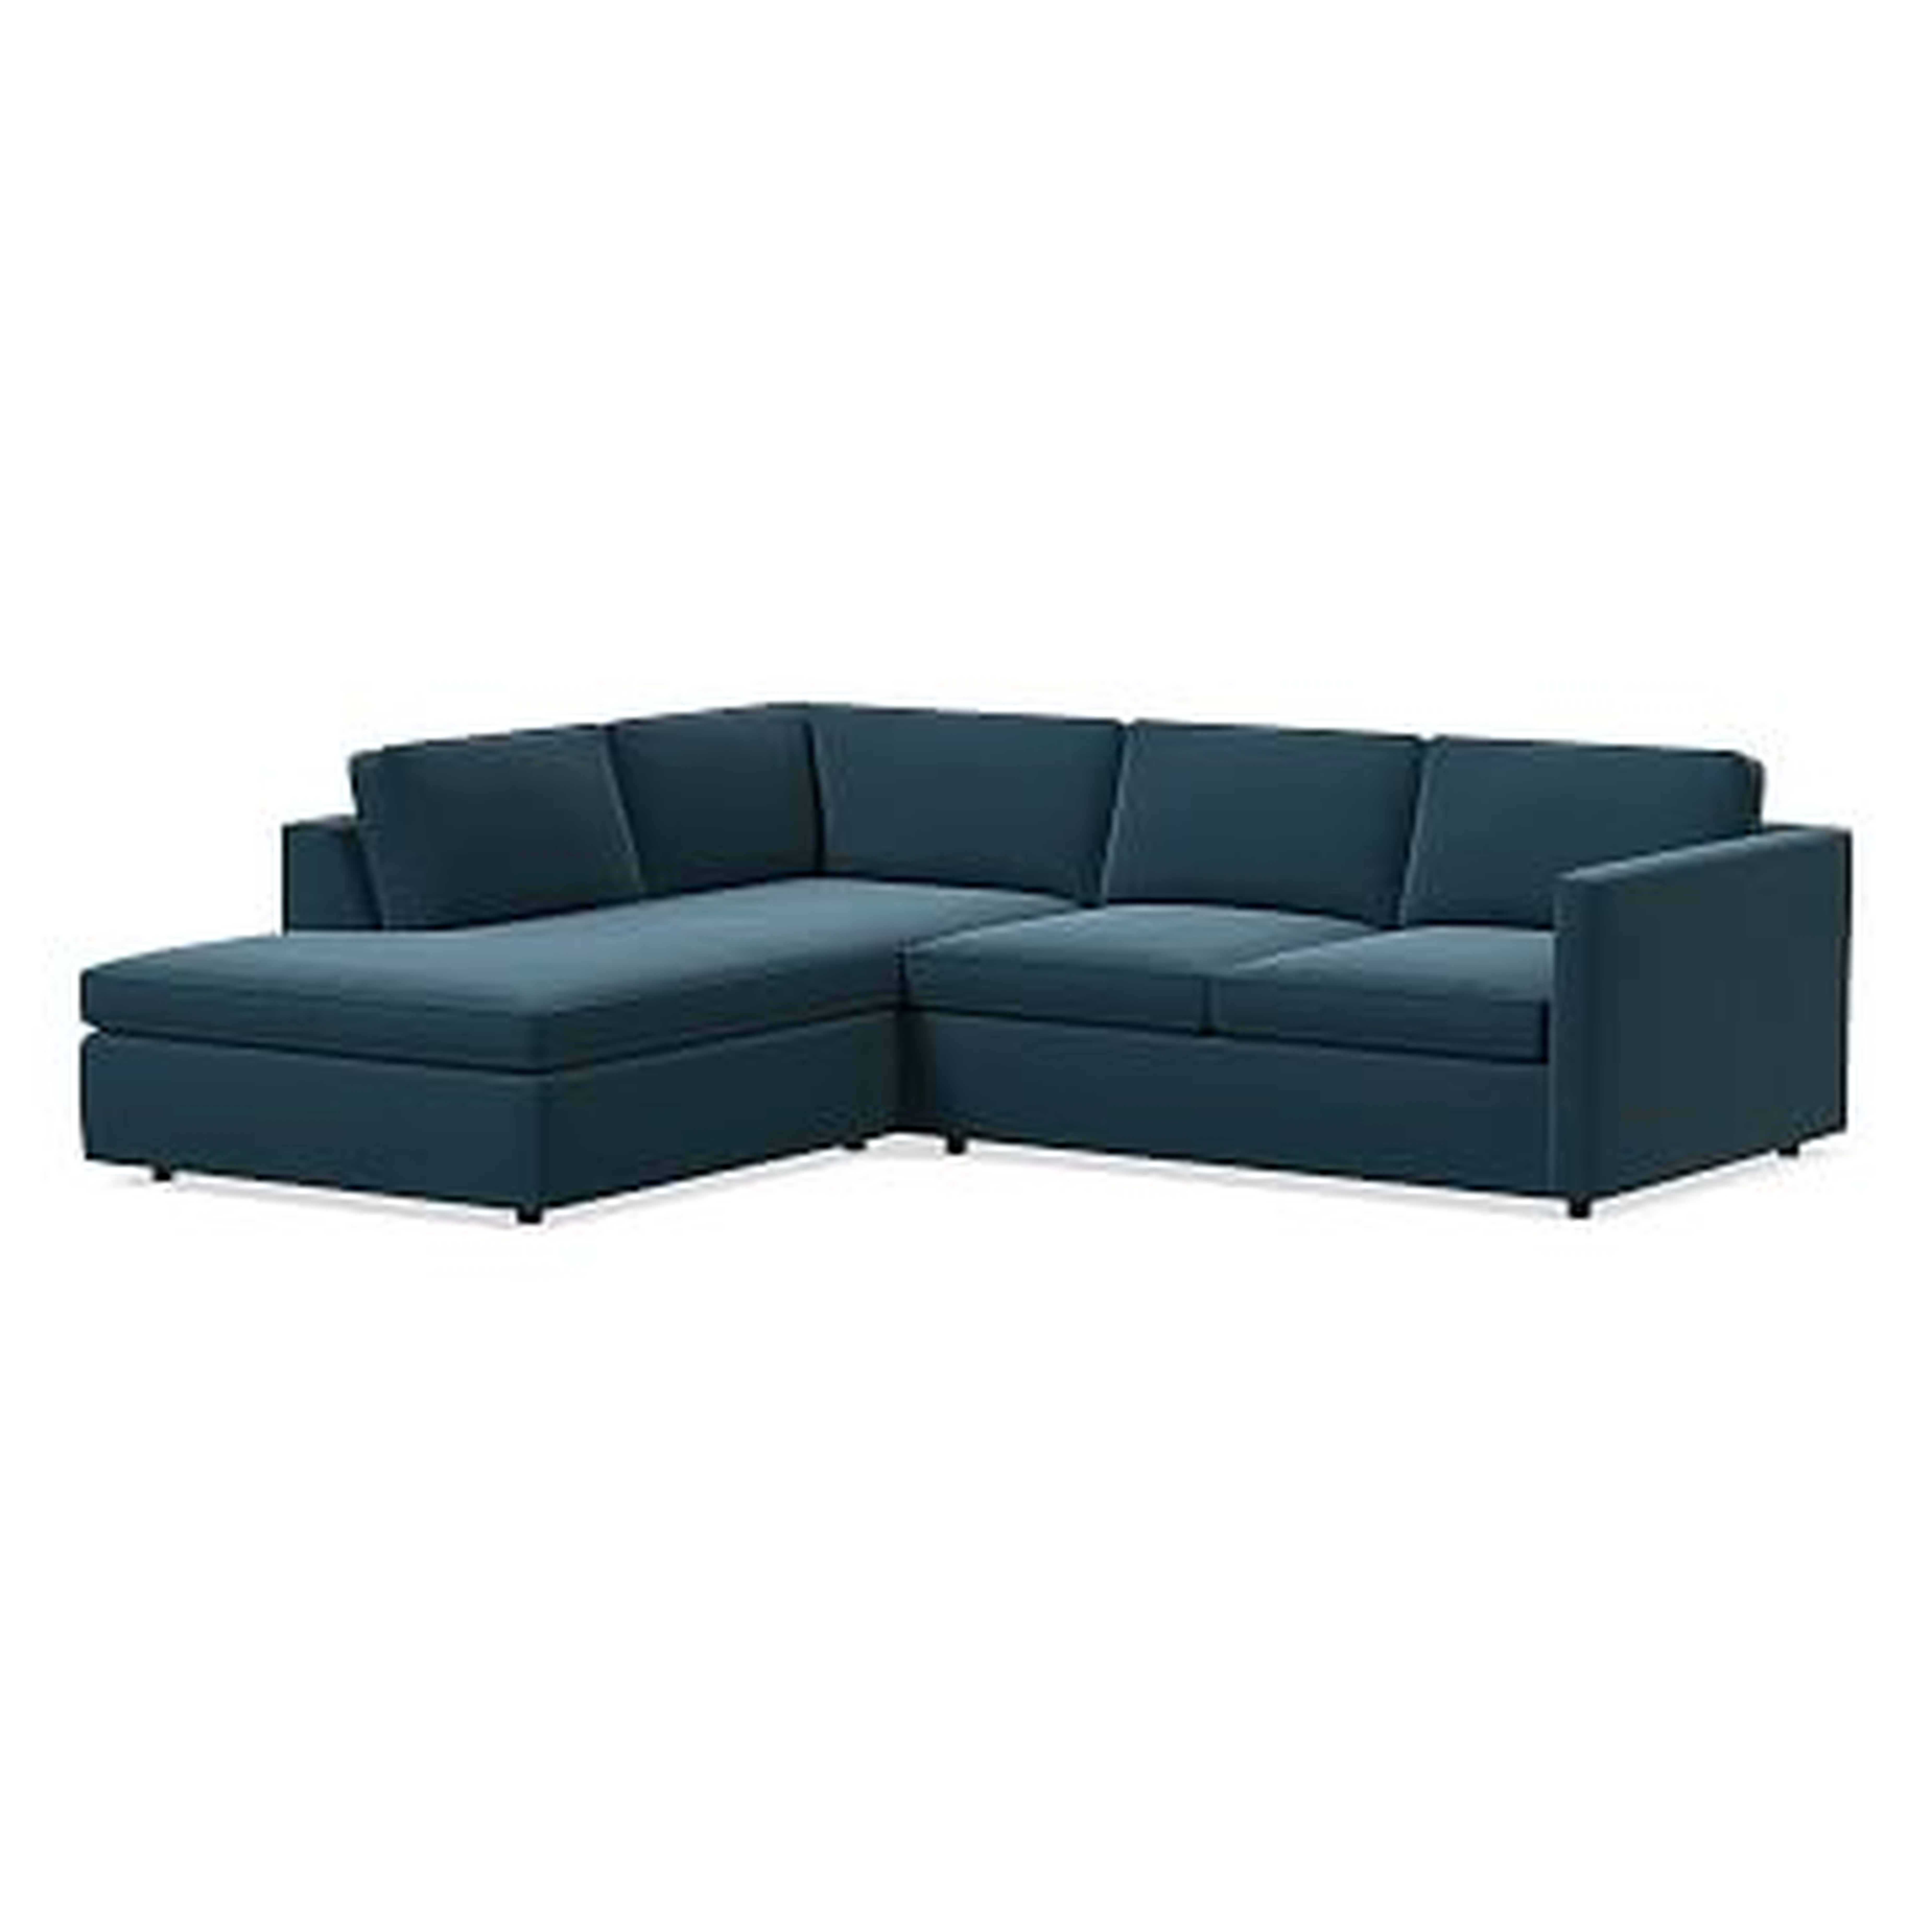 Harris Sectional Set 25: XL RA 65" Sofa, XL LA Terminal Chaise, Poly, Performance Velvet, Petrol, Concealed Supports - West Elm